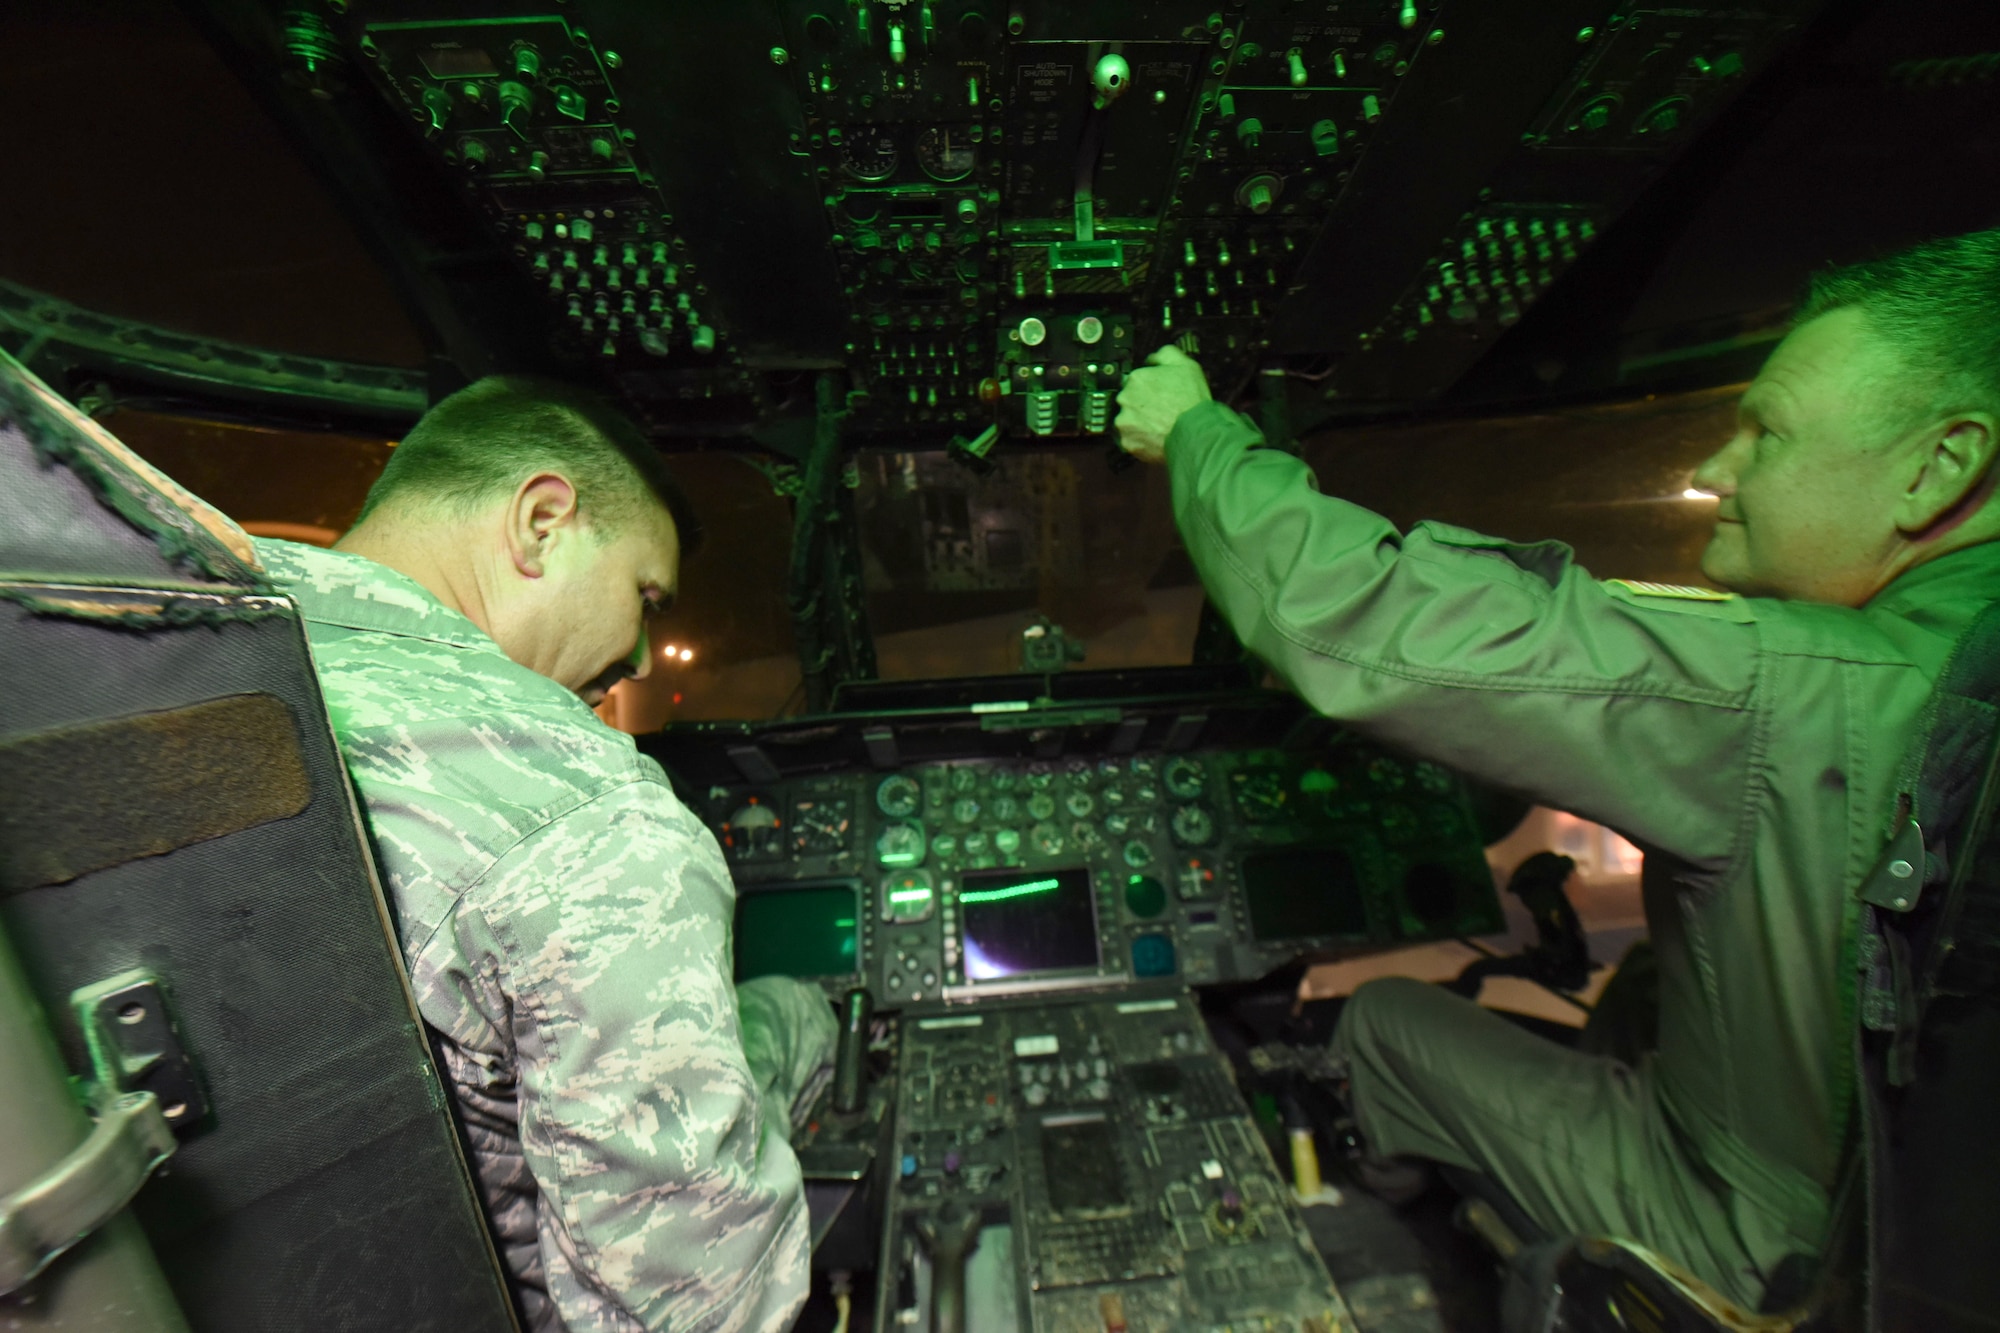 Lt. Gen. Brad Webb, Air Force Special Operations Command commander, sits in the cockpit of an MH-53 J/M “Pave Low IV” special operations helicopter at the Warner Robins Museum of Aviation May 29, 2018. Webb flew the tail number 70-1626 while commanding the 20th Special Operations Squadron at Hurlburt Field, Florida. (U.S. Air Force photo by Tommie Horton)